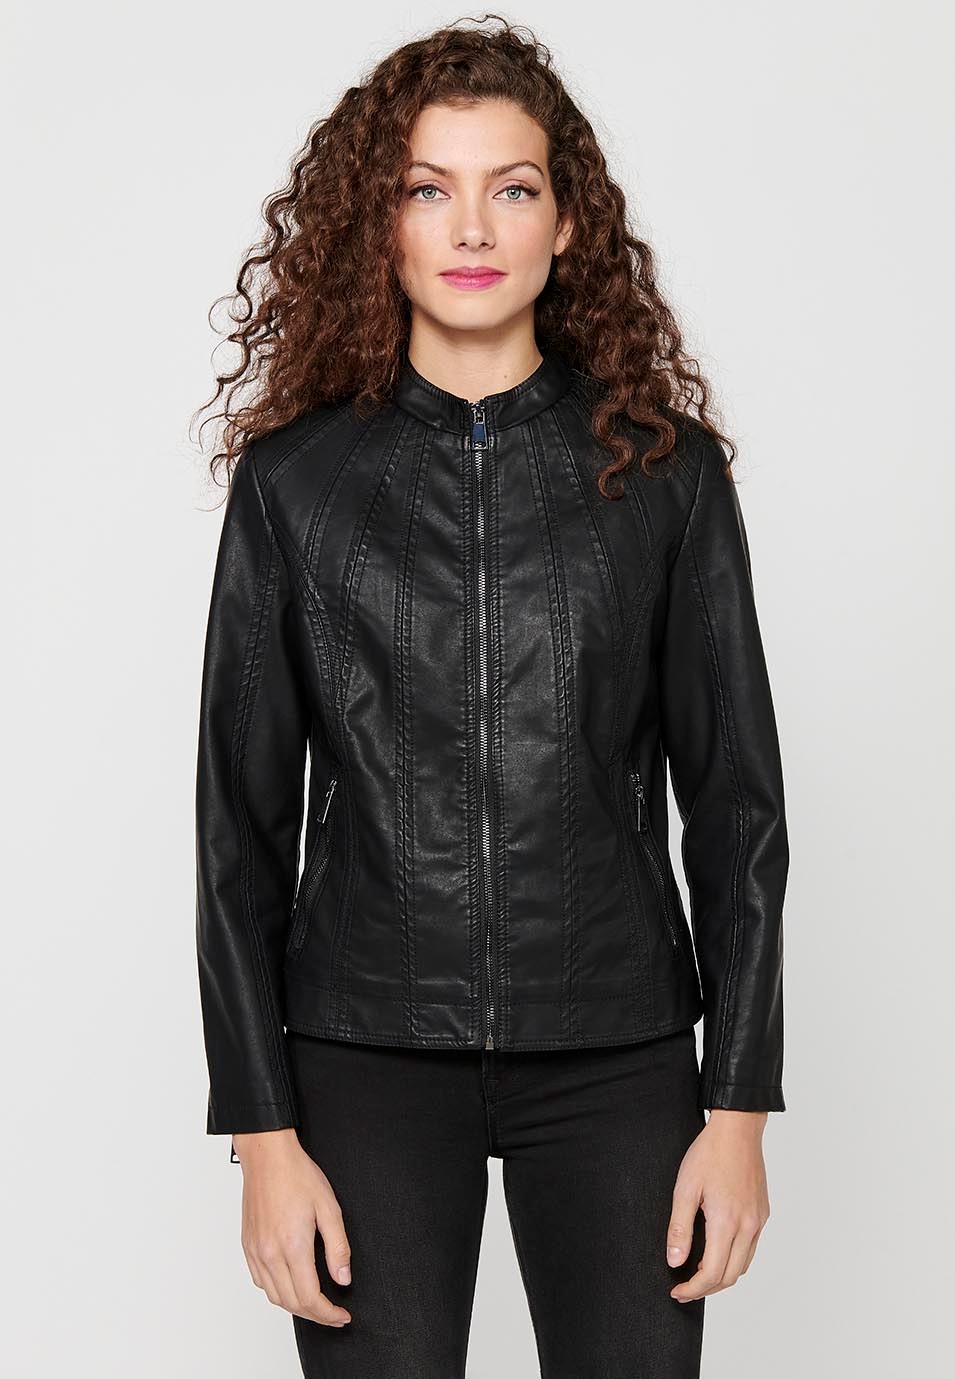 Long Sleeve Jacket with Round High Neck and Front Zipper Closure in Black for Women 3